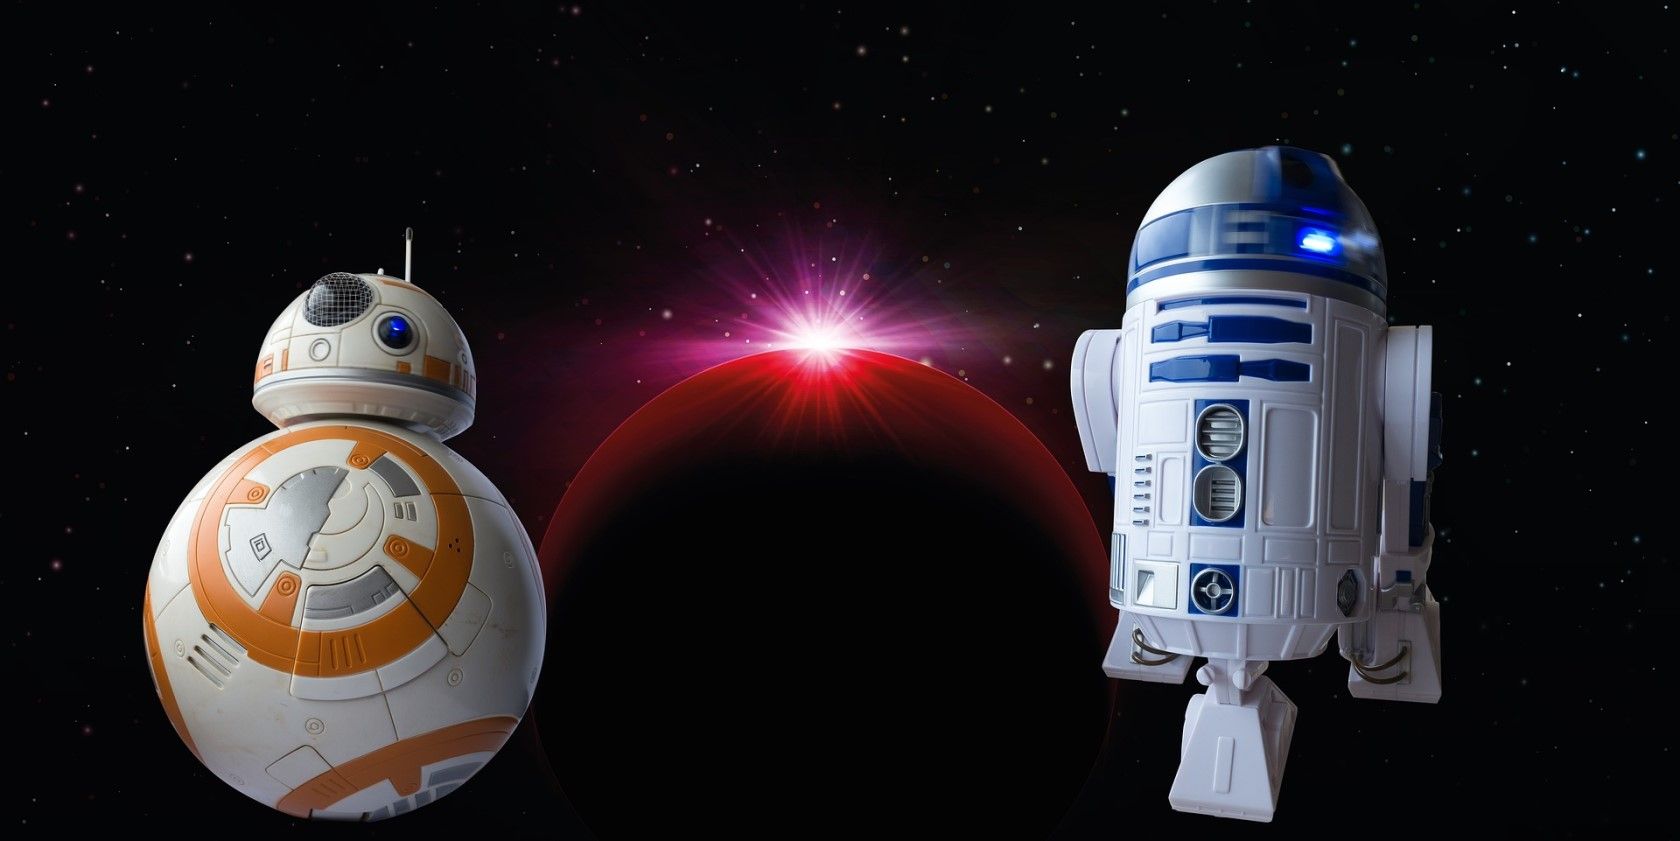 Star Wars droids BB-8 and R2-D2